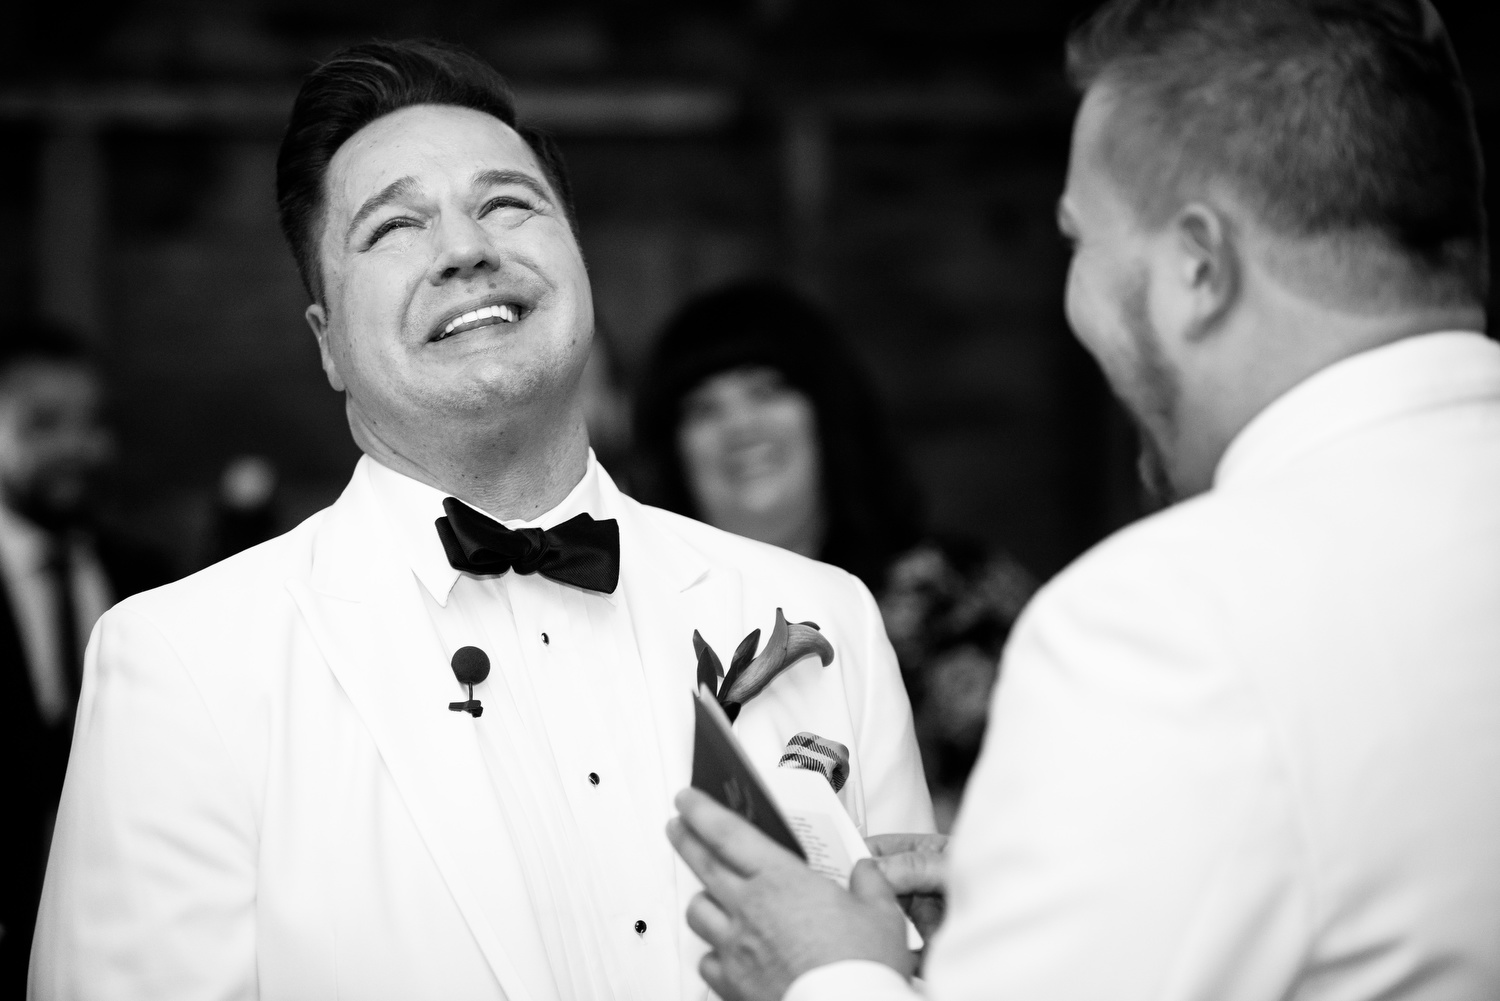 Grooms laugh during their wedding ceremony at Heritage Prairie Farm.